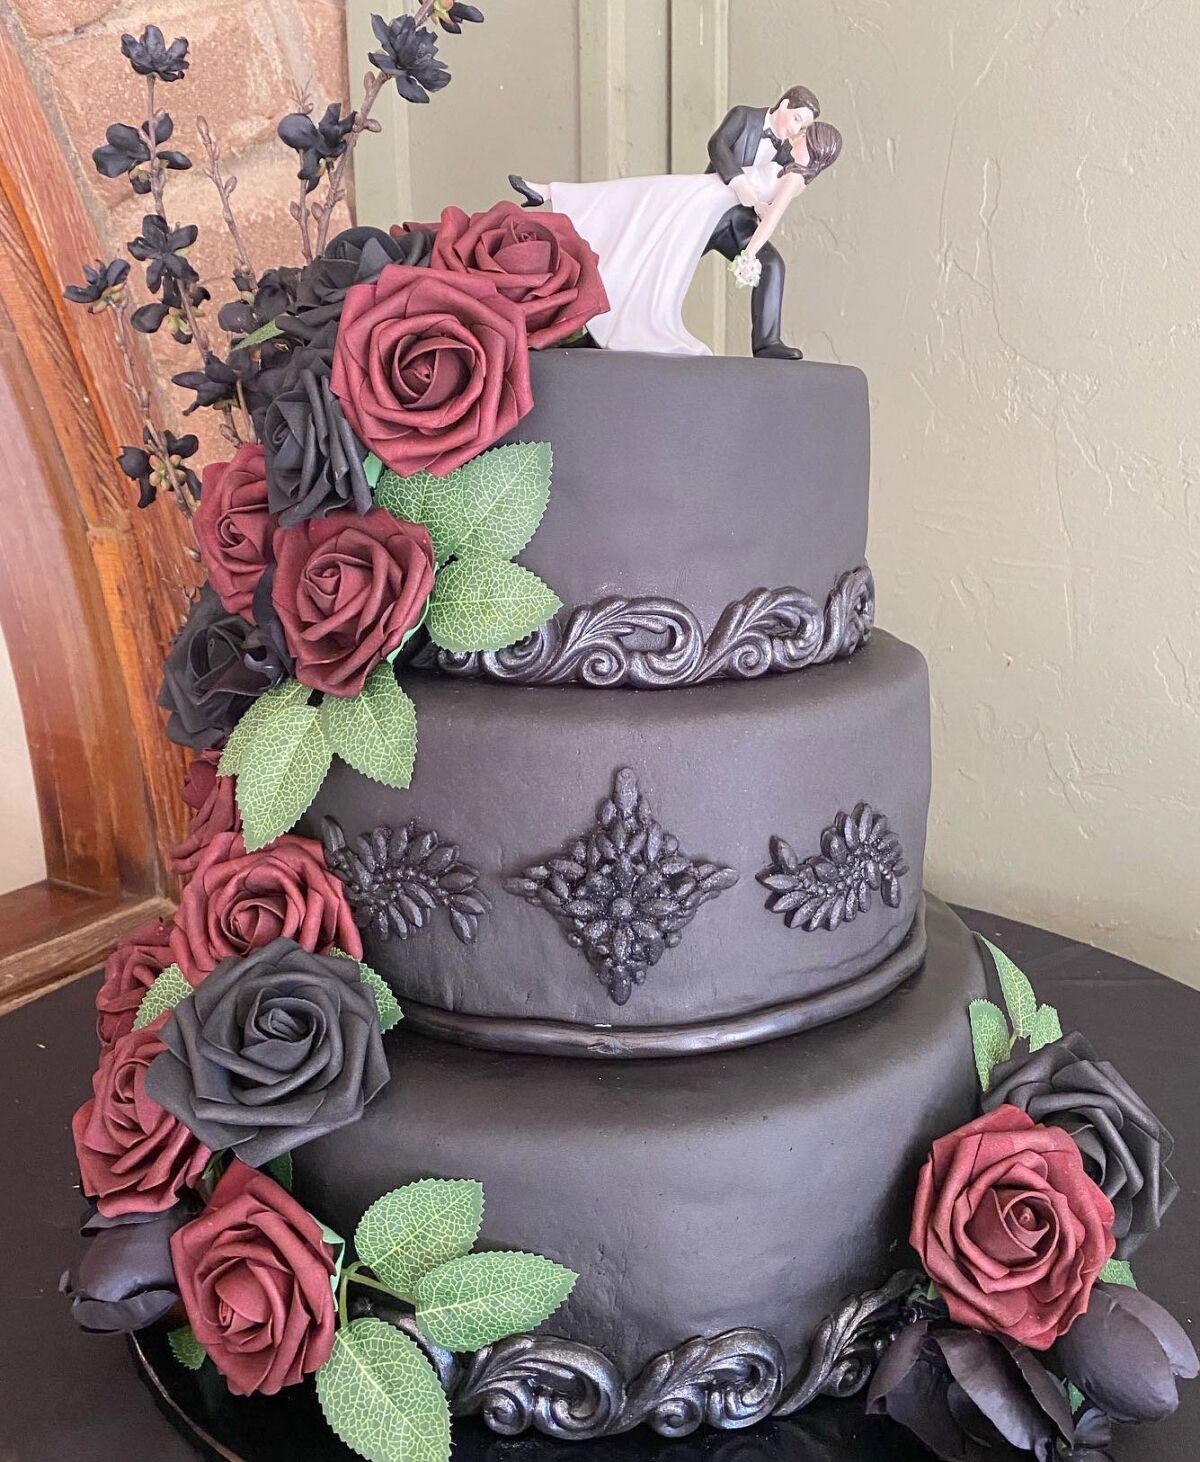 This cake was made to reflect the Victorian/Sleepy Hollow style of Wears combined with a southern style fall festival wedding theme.